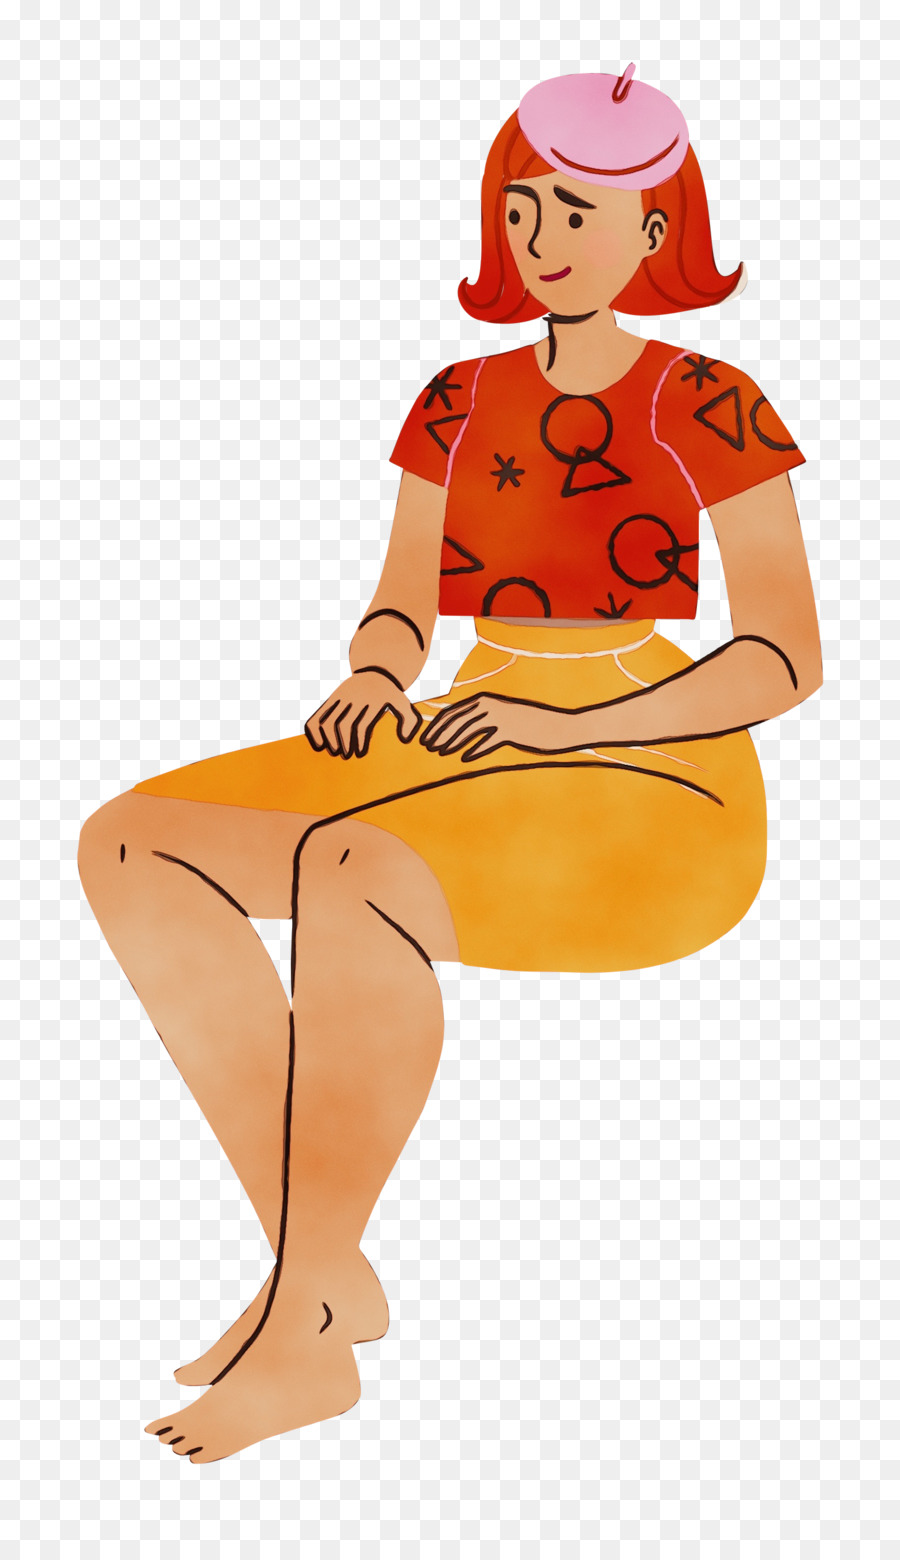 joint cartoon pin-up girl sitting science